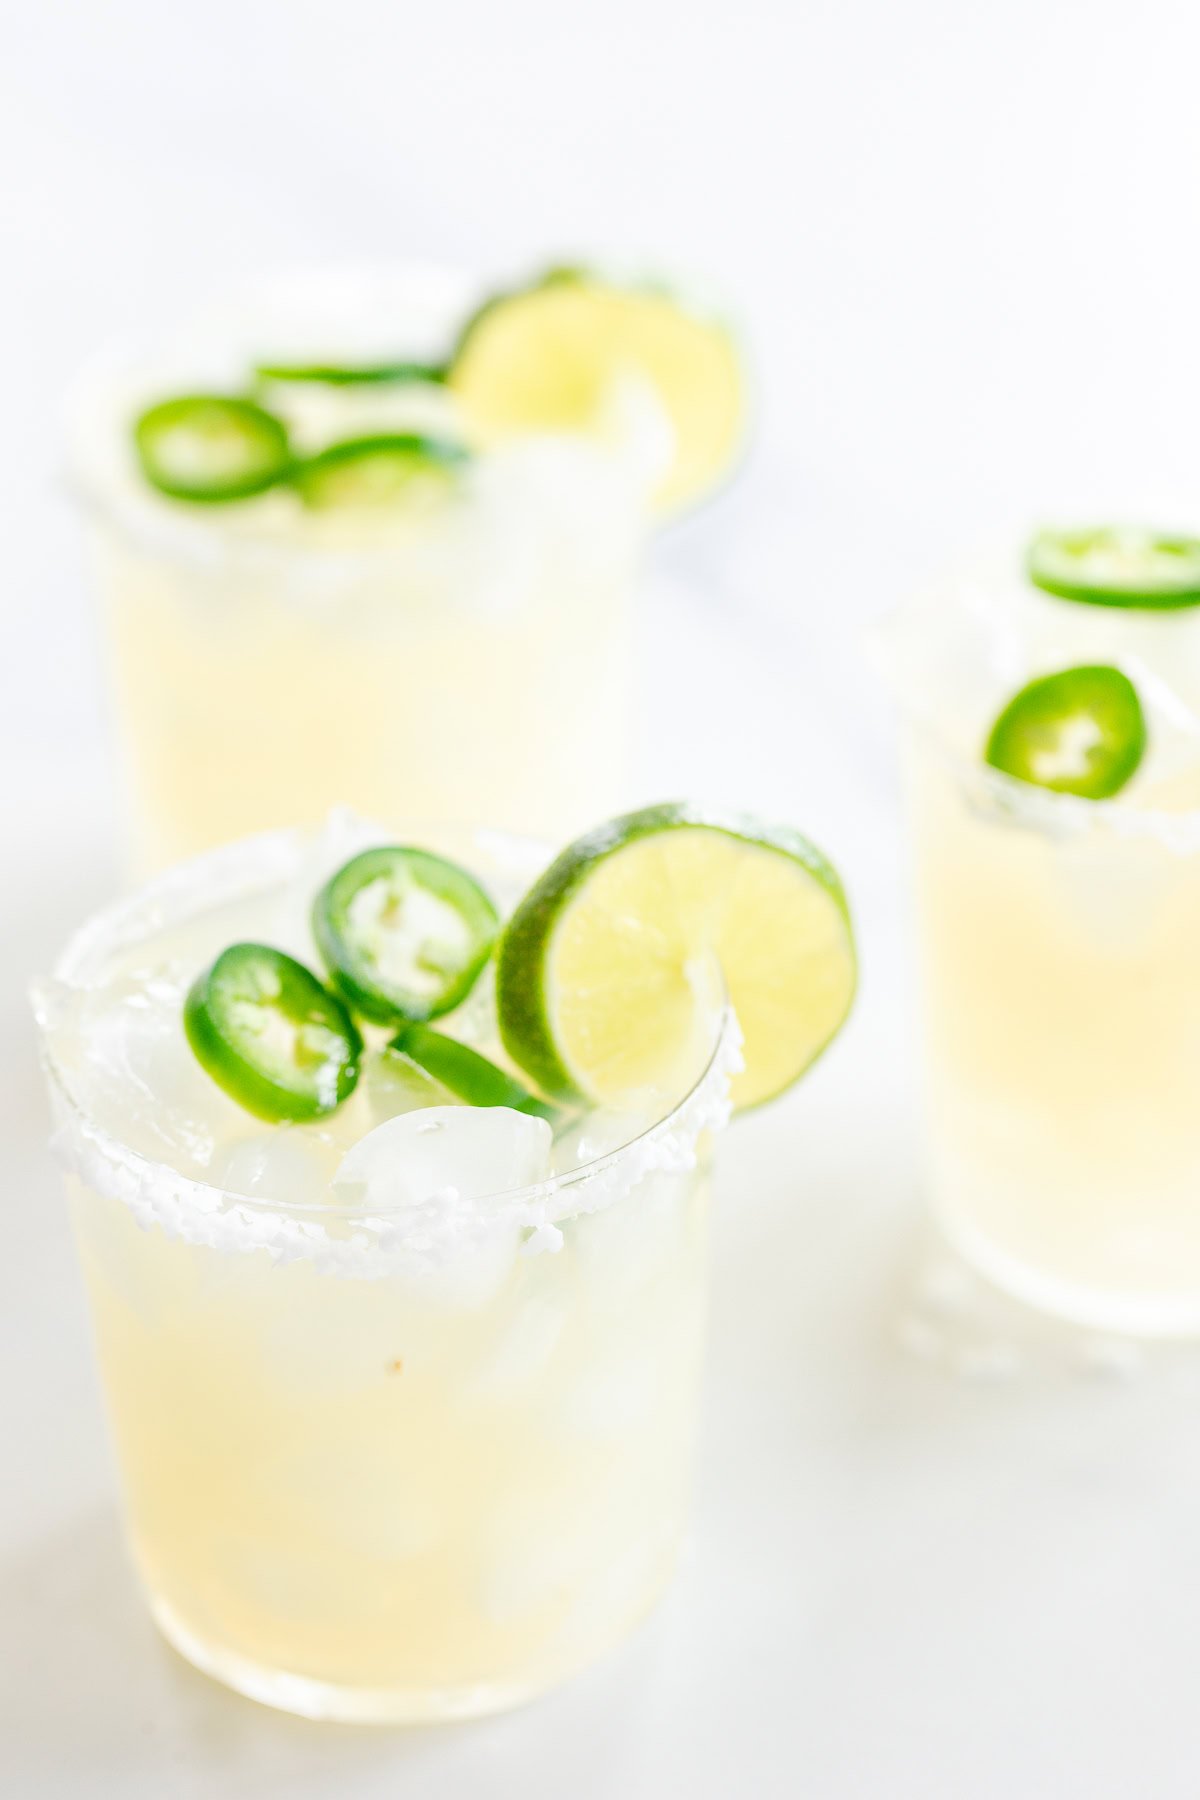 Three glasses of Jalapeño Margaritas with lime slices and ice, garnished with salt rims and jalapeño slices on a white surface.